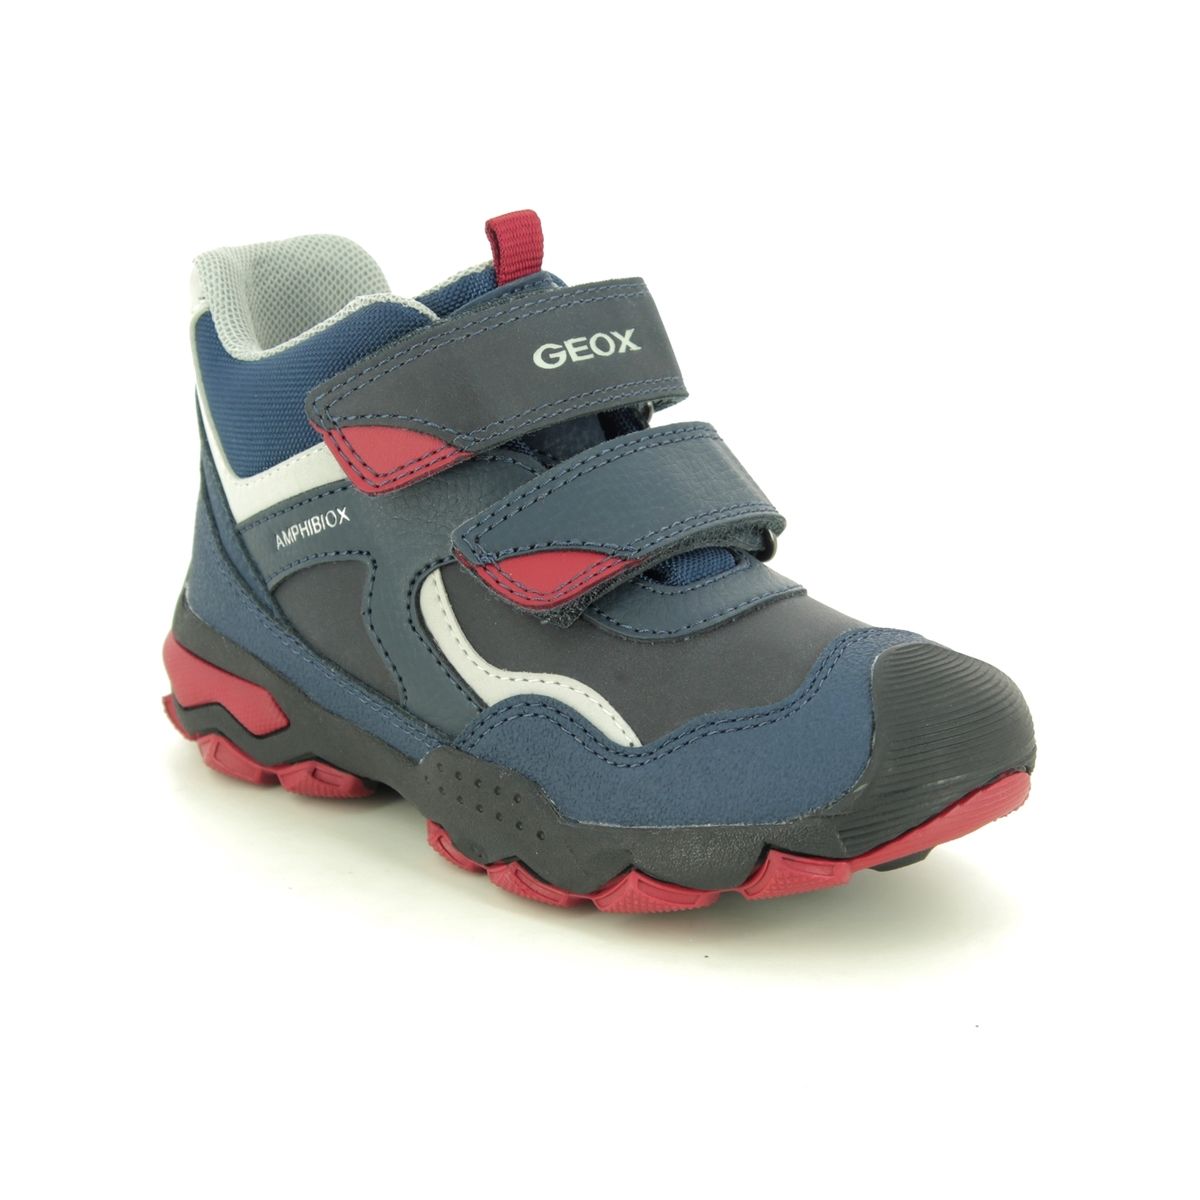 Geox - Buller Boy Tex (Navy Red) J049Wb-C4244 In Size 27 In Plain Navy Red For kids